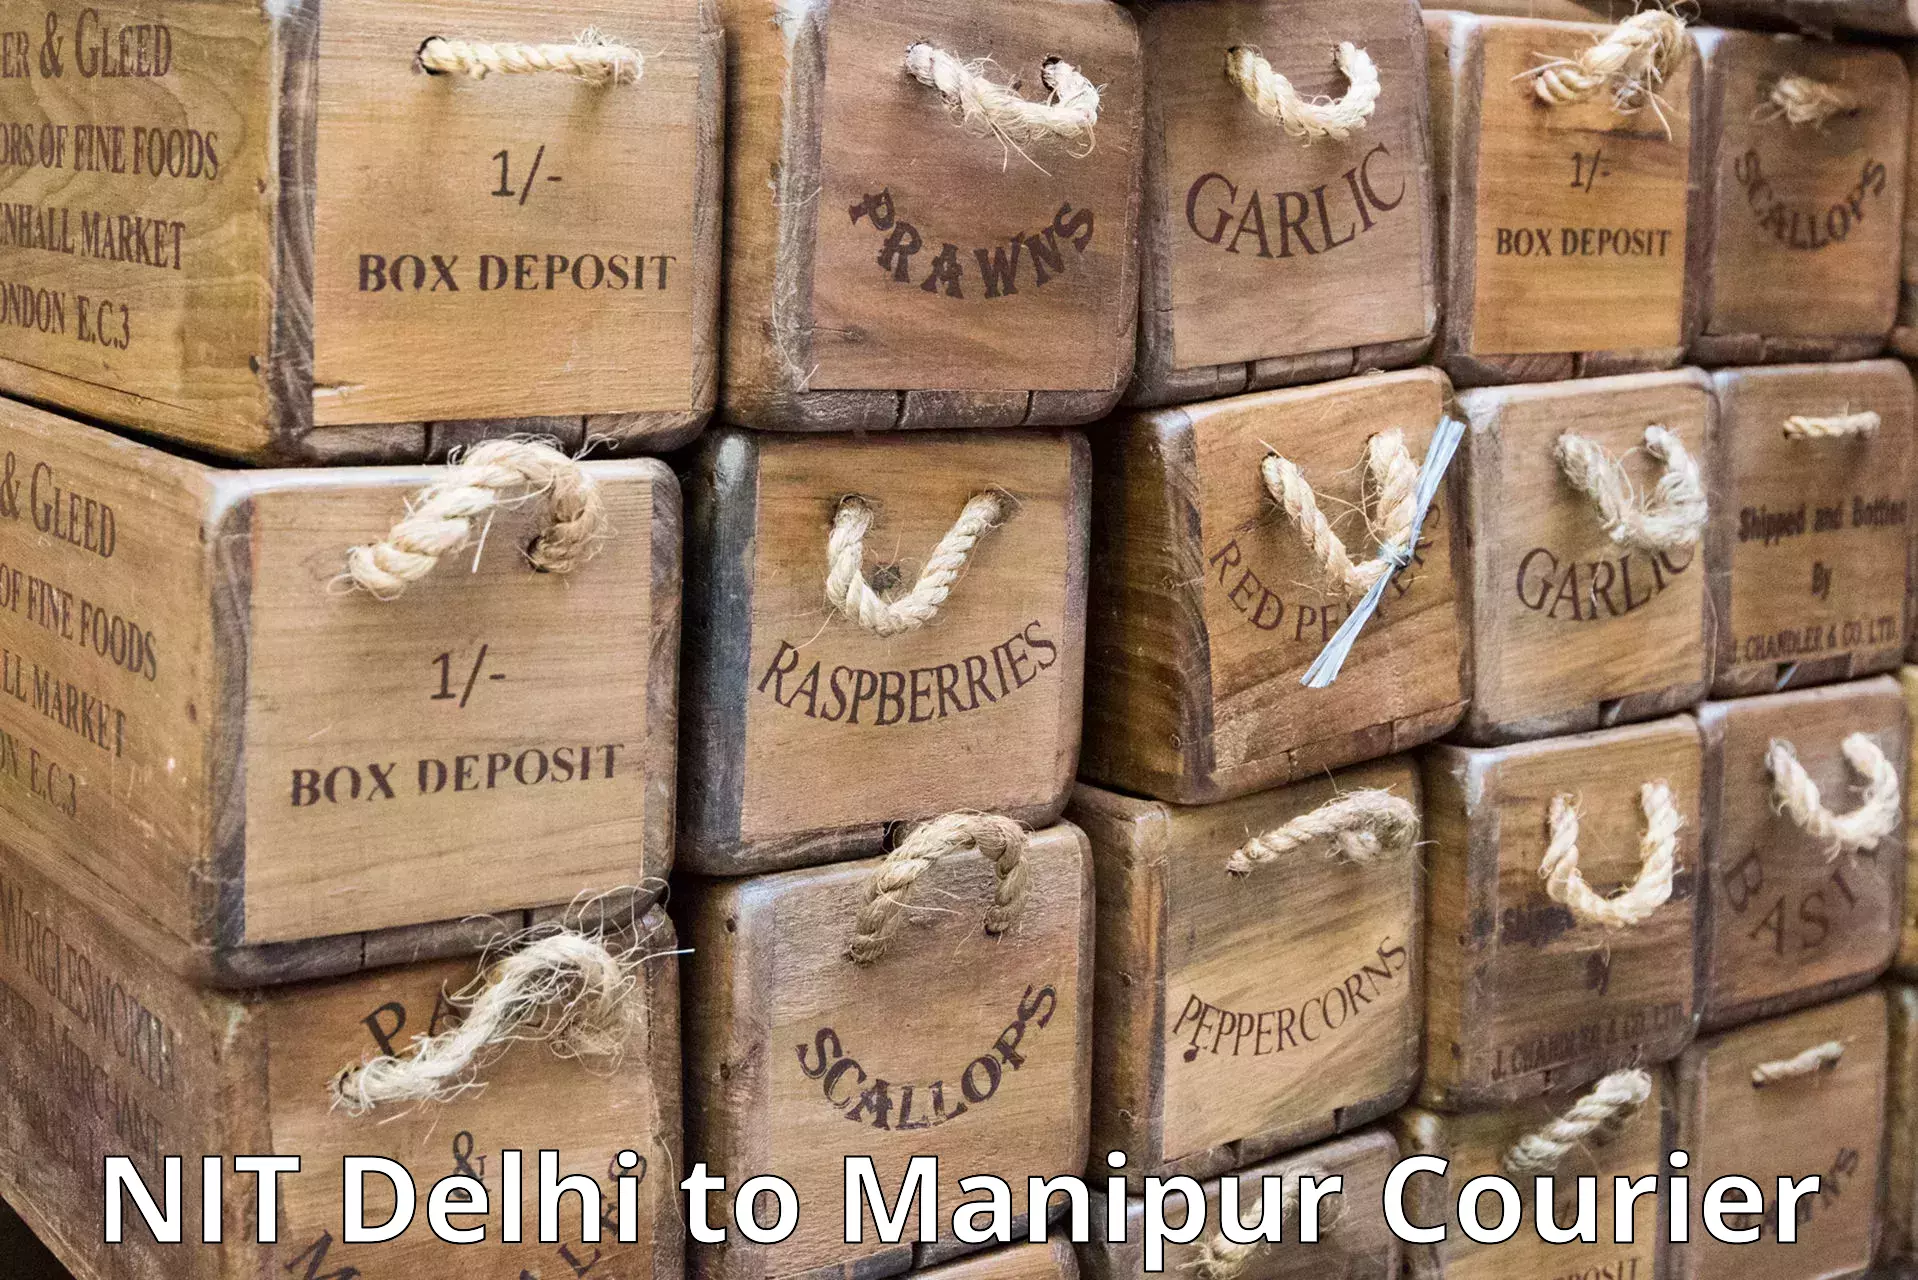 Express delivery network NIT Delhi to NIT Manipur